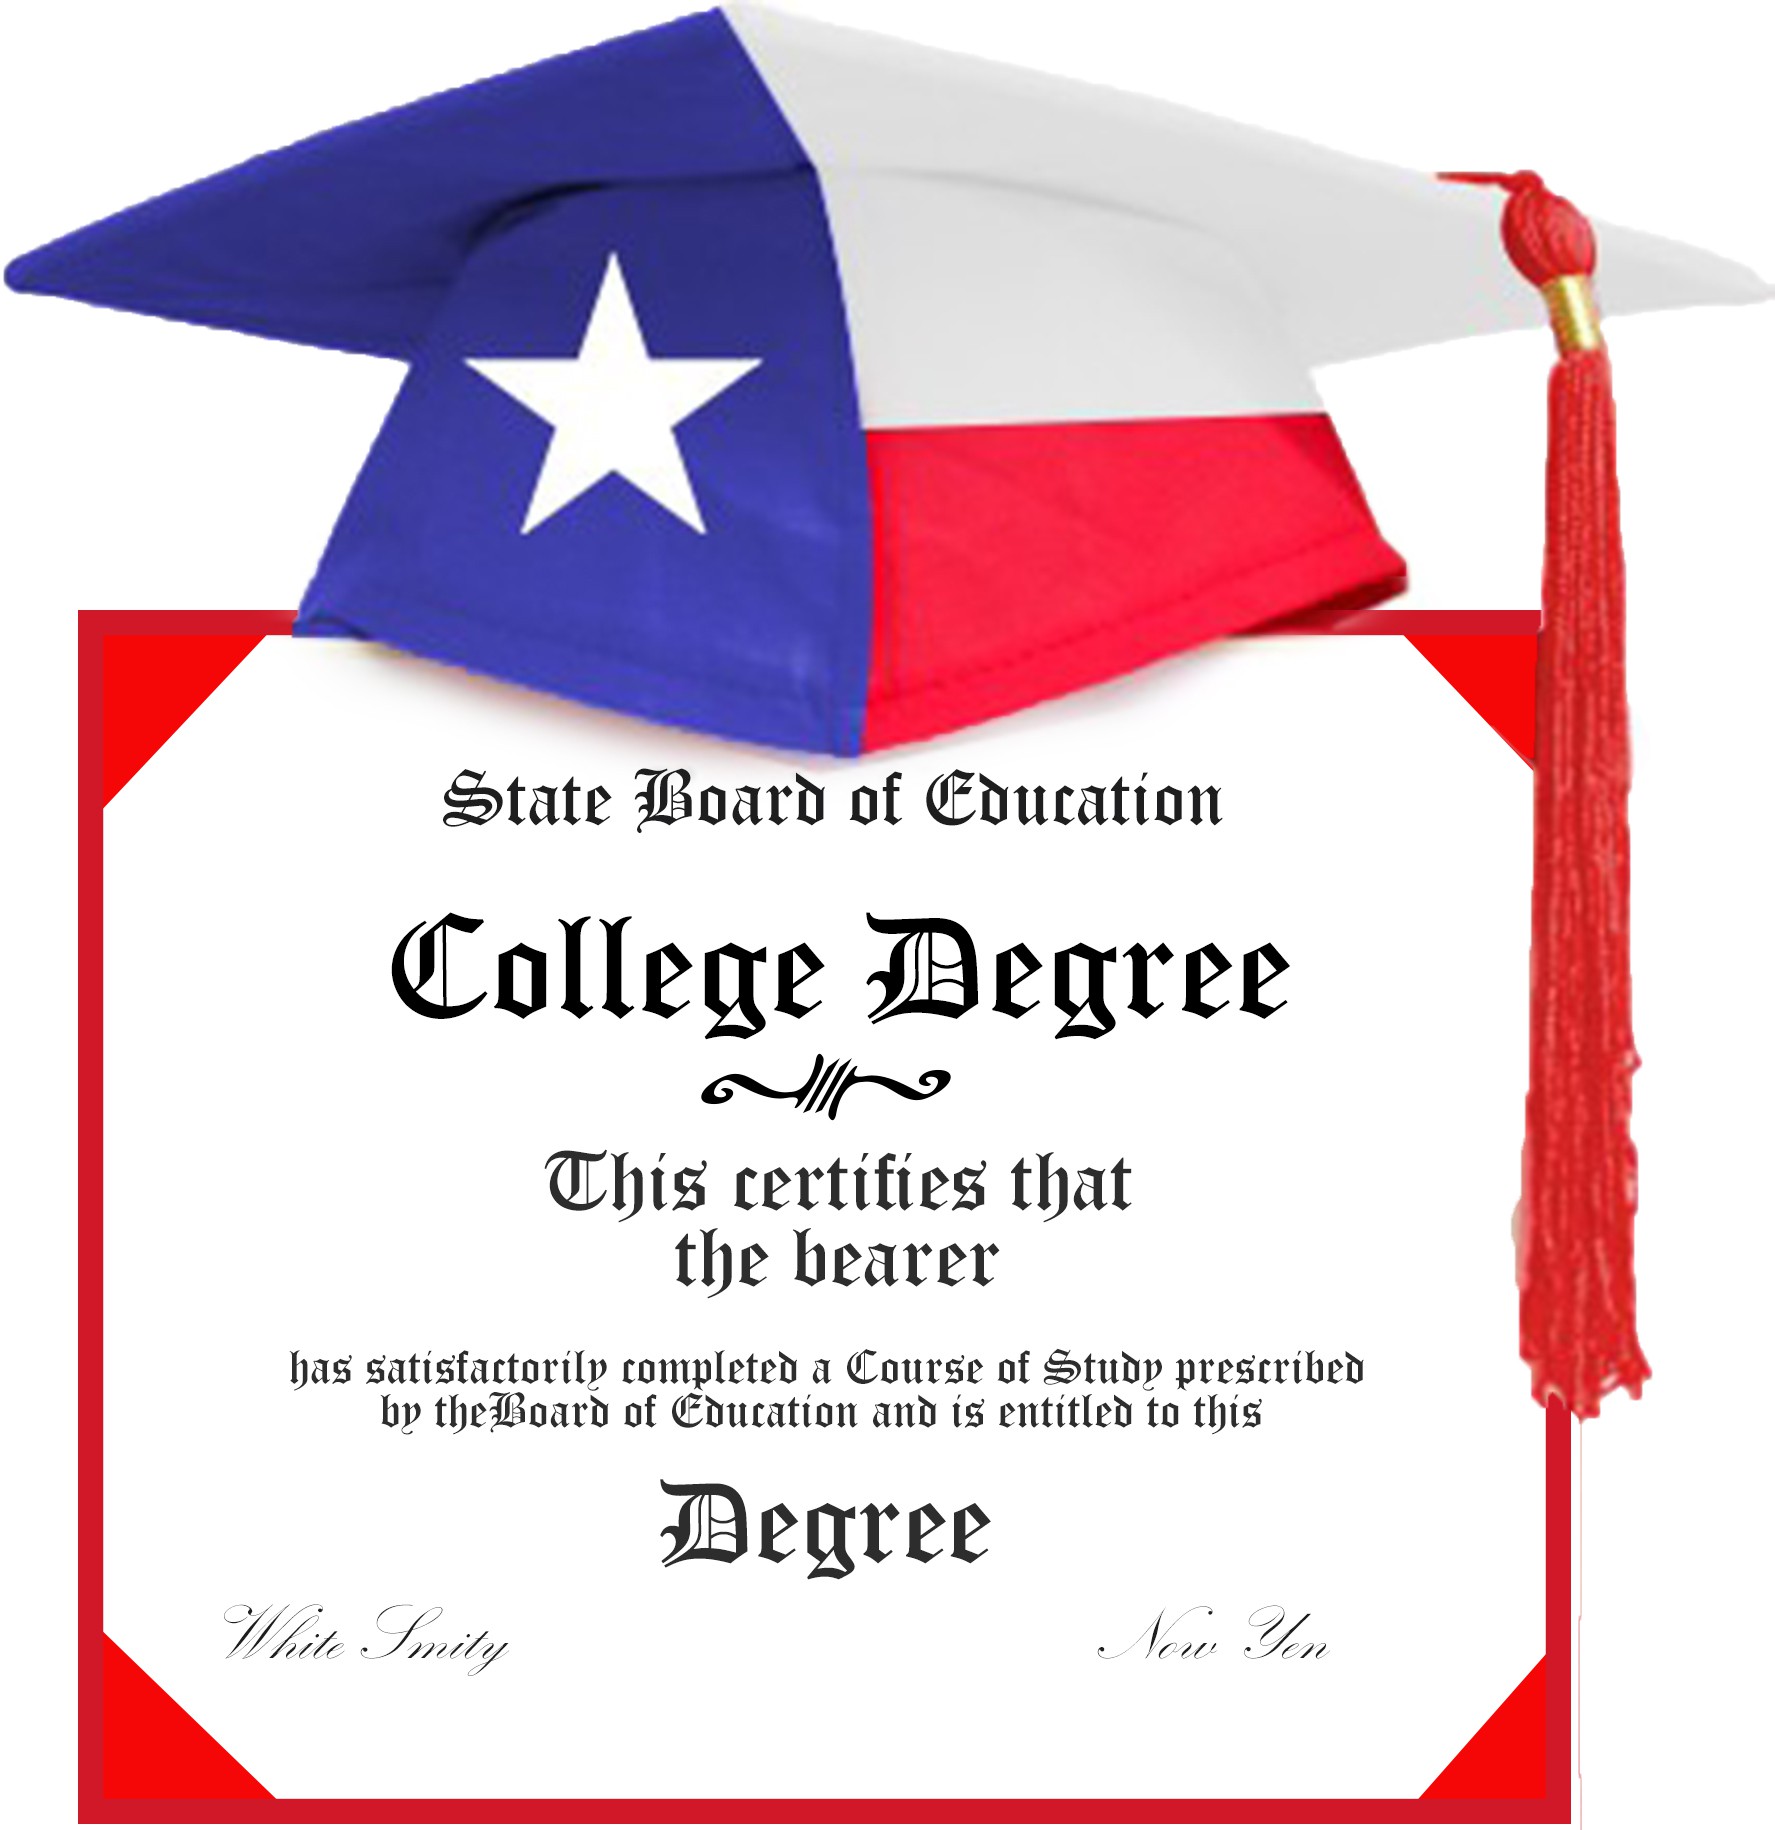 The University of Texas at Dallas College Degree